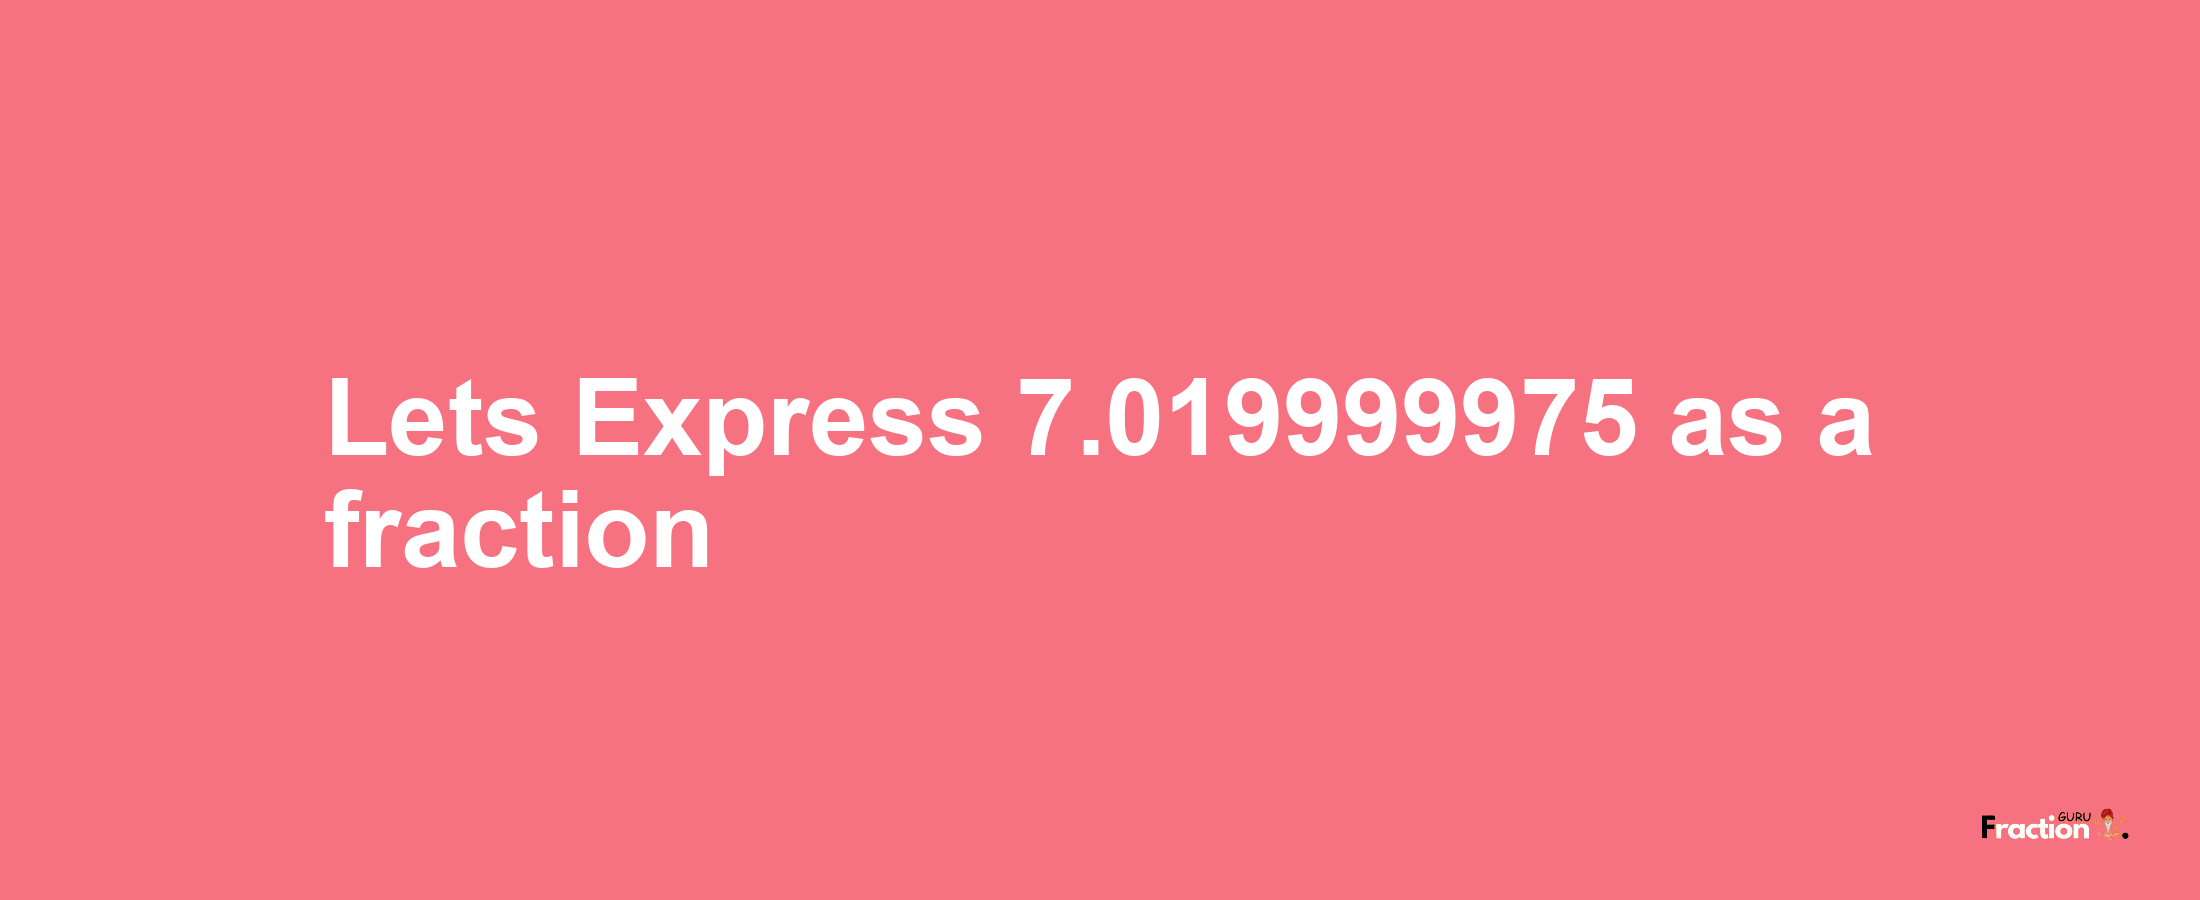 Lets Express 7.019999975 as afraction